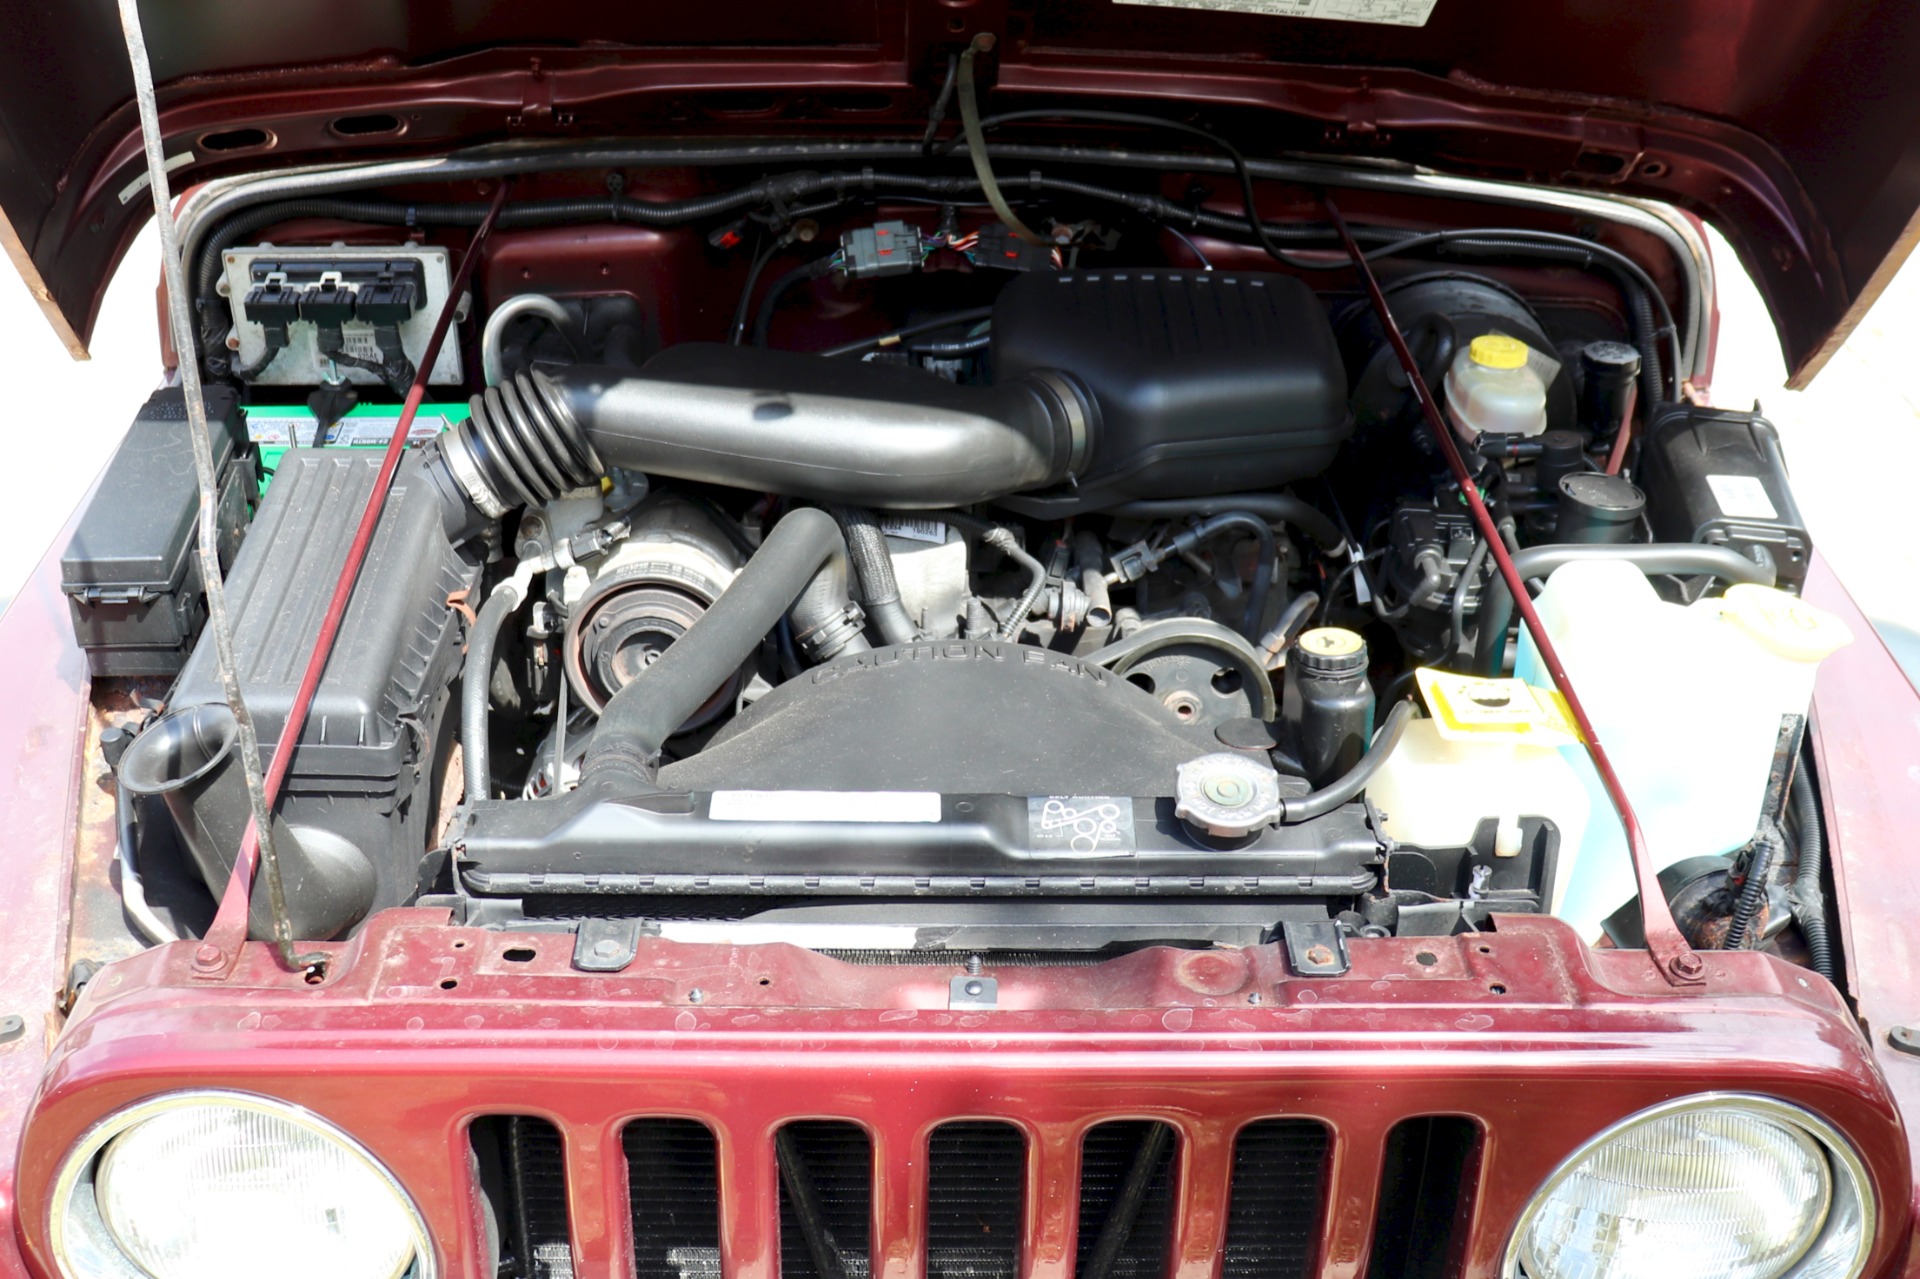 Used 2002 Jeep Wrangler SE For Sale ($15,995) | Select Jeeps Inc. Stock  #737225